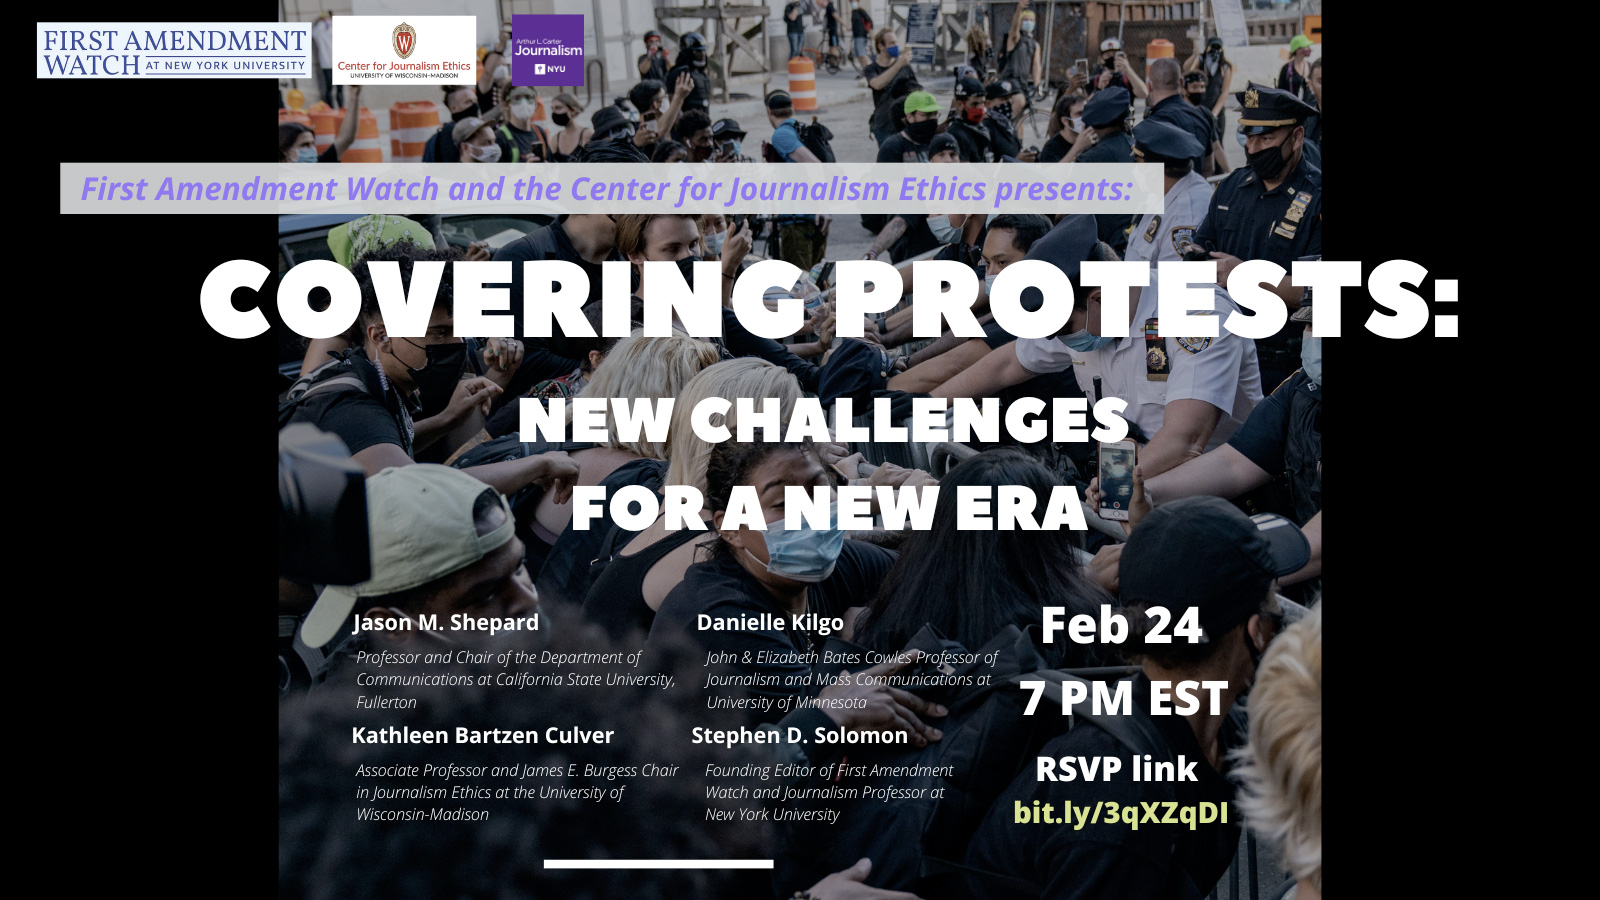 Event Poster - 2021 Spring - Covering Protests: New Challenges for a New Era - February 24th, 2021, 7:00pm ET - See event page for details